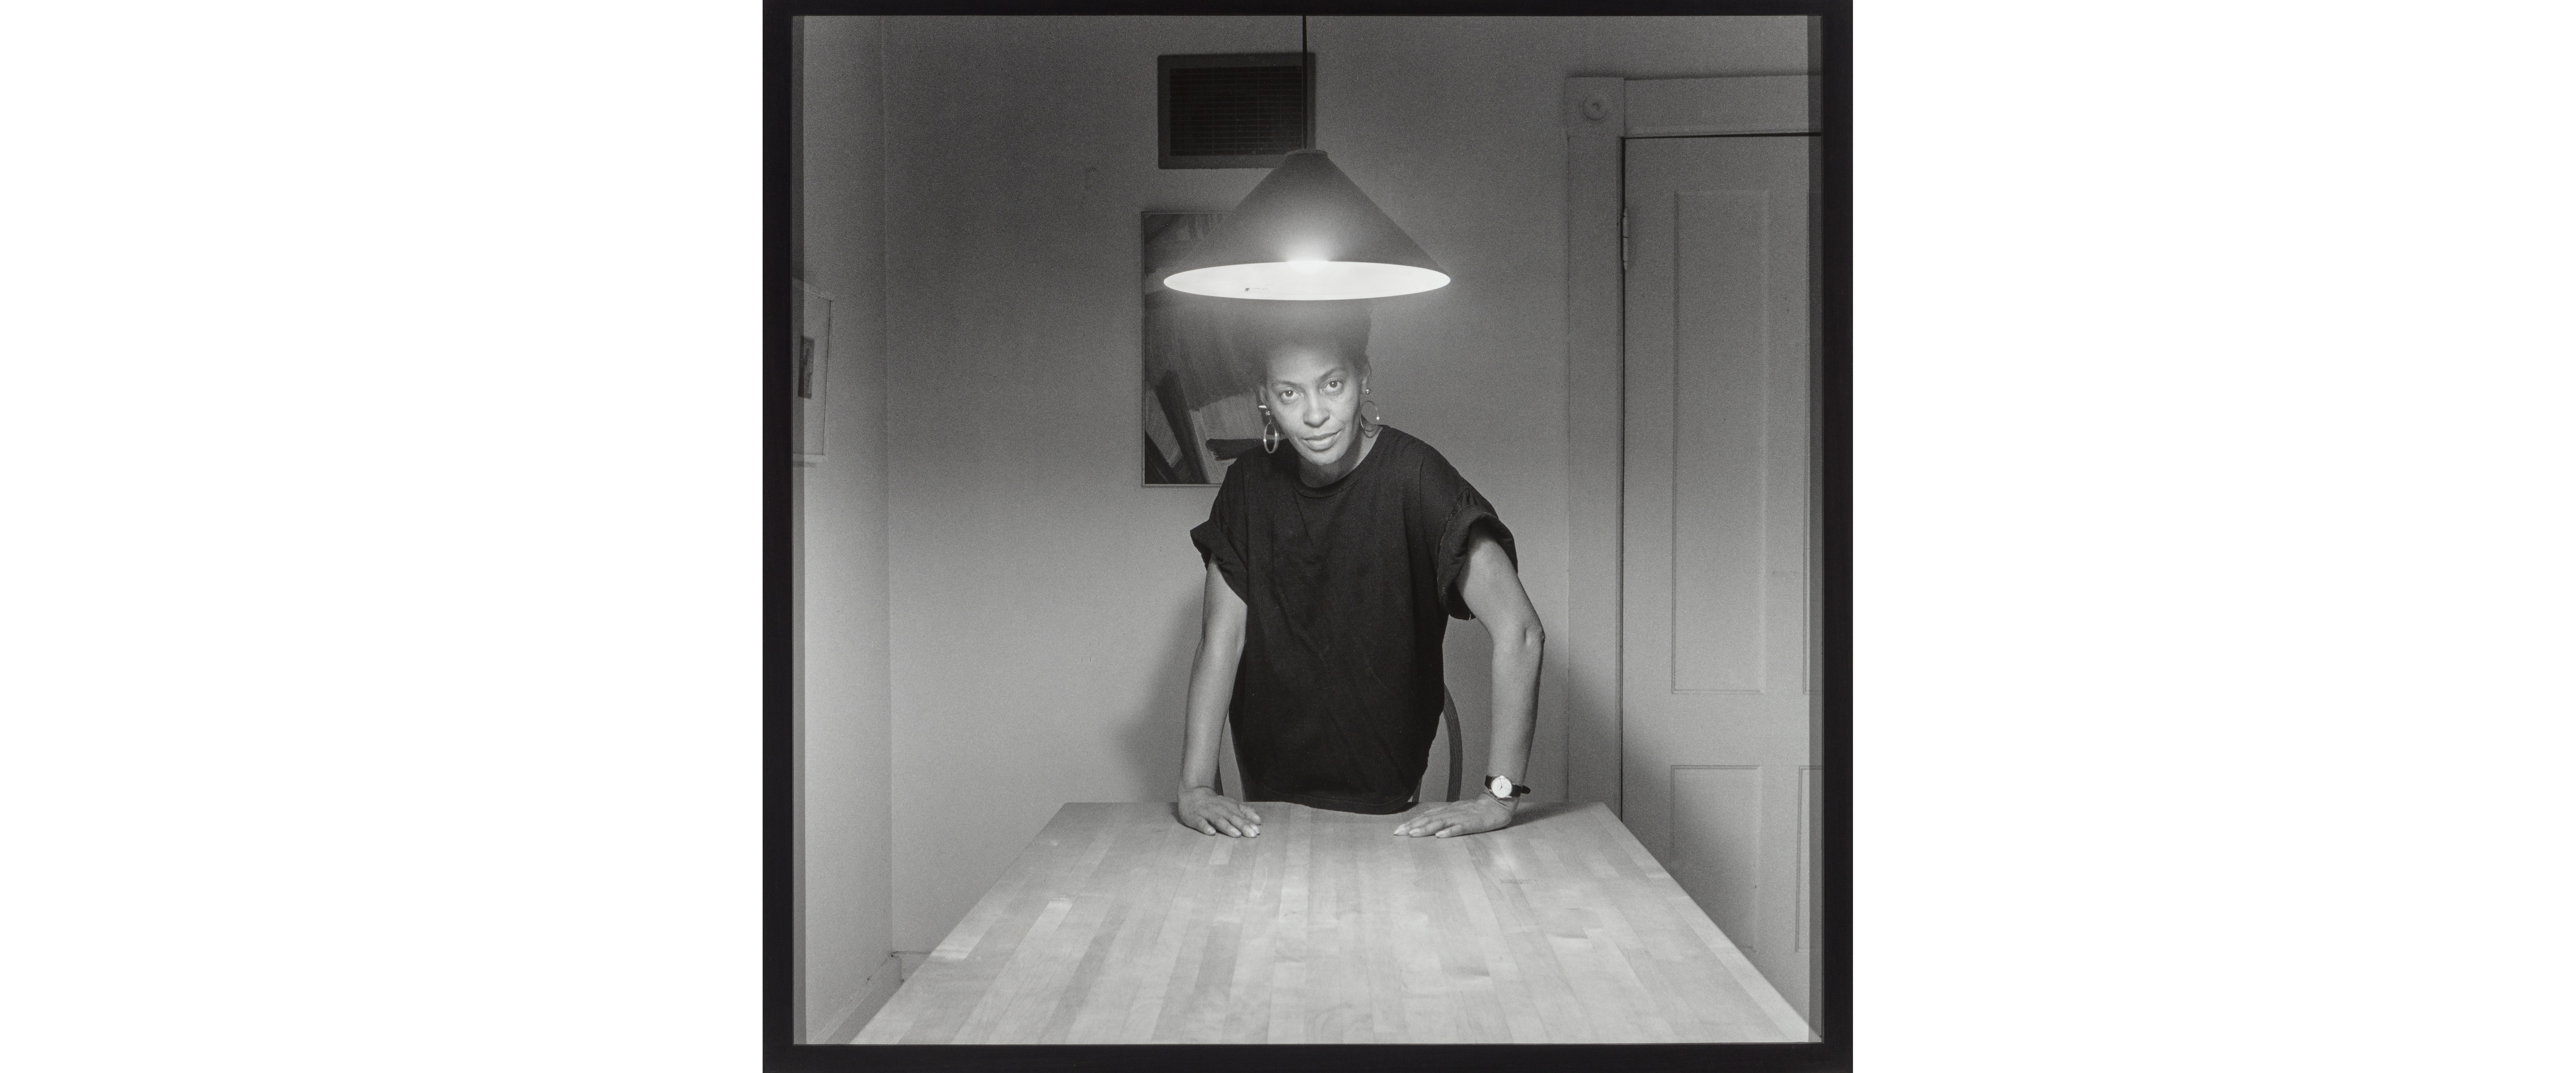 Carrie Mae Weems, Untitled (Woman standing), 1990. 